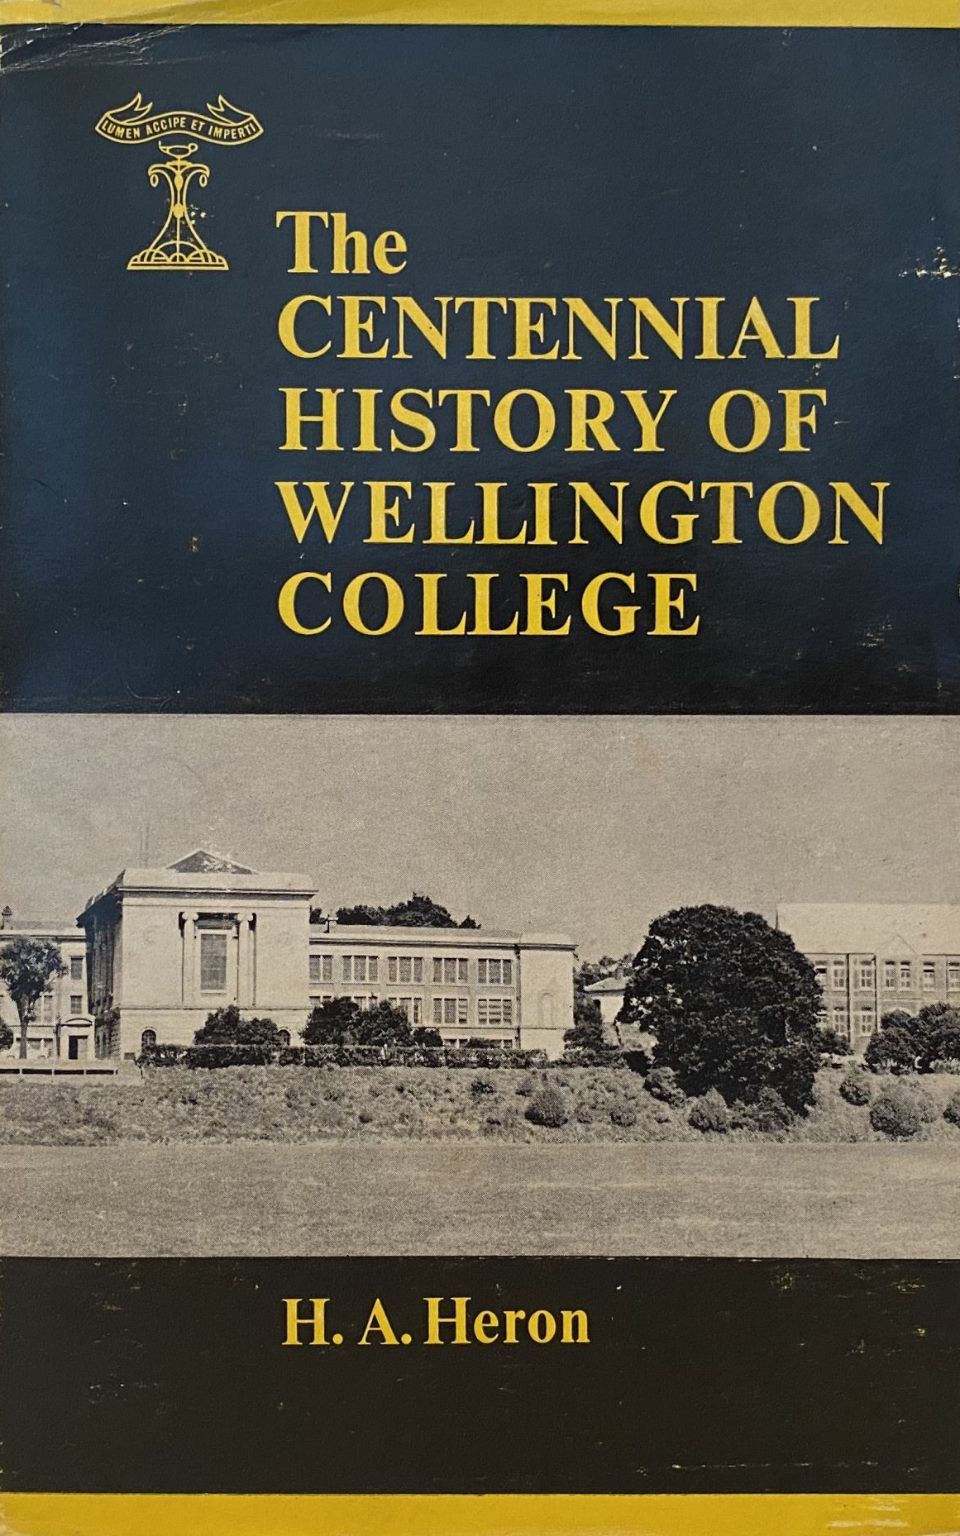 THE CENTENNIAL HISTORY OF WELLINGTON COLLEGE